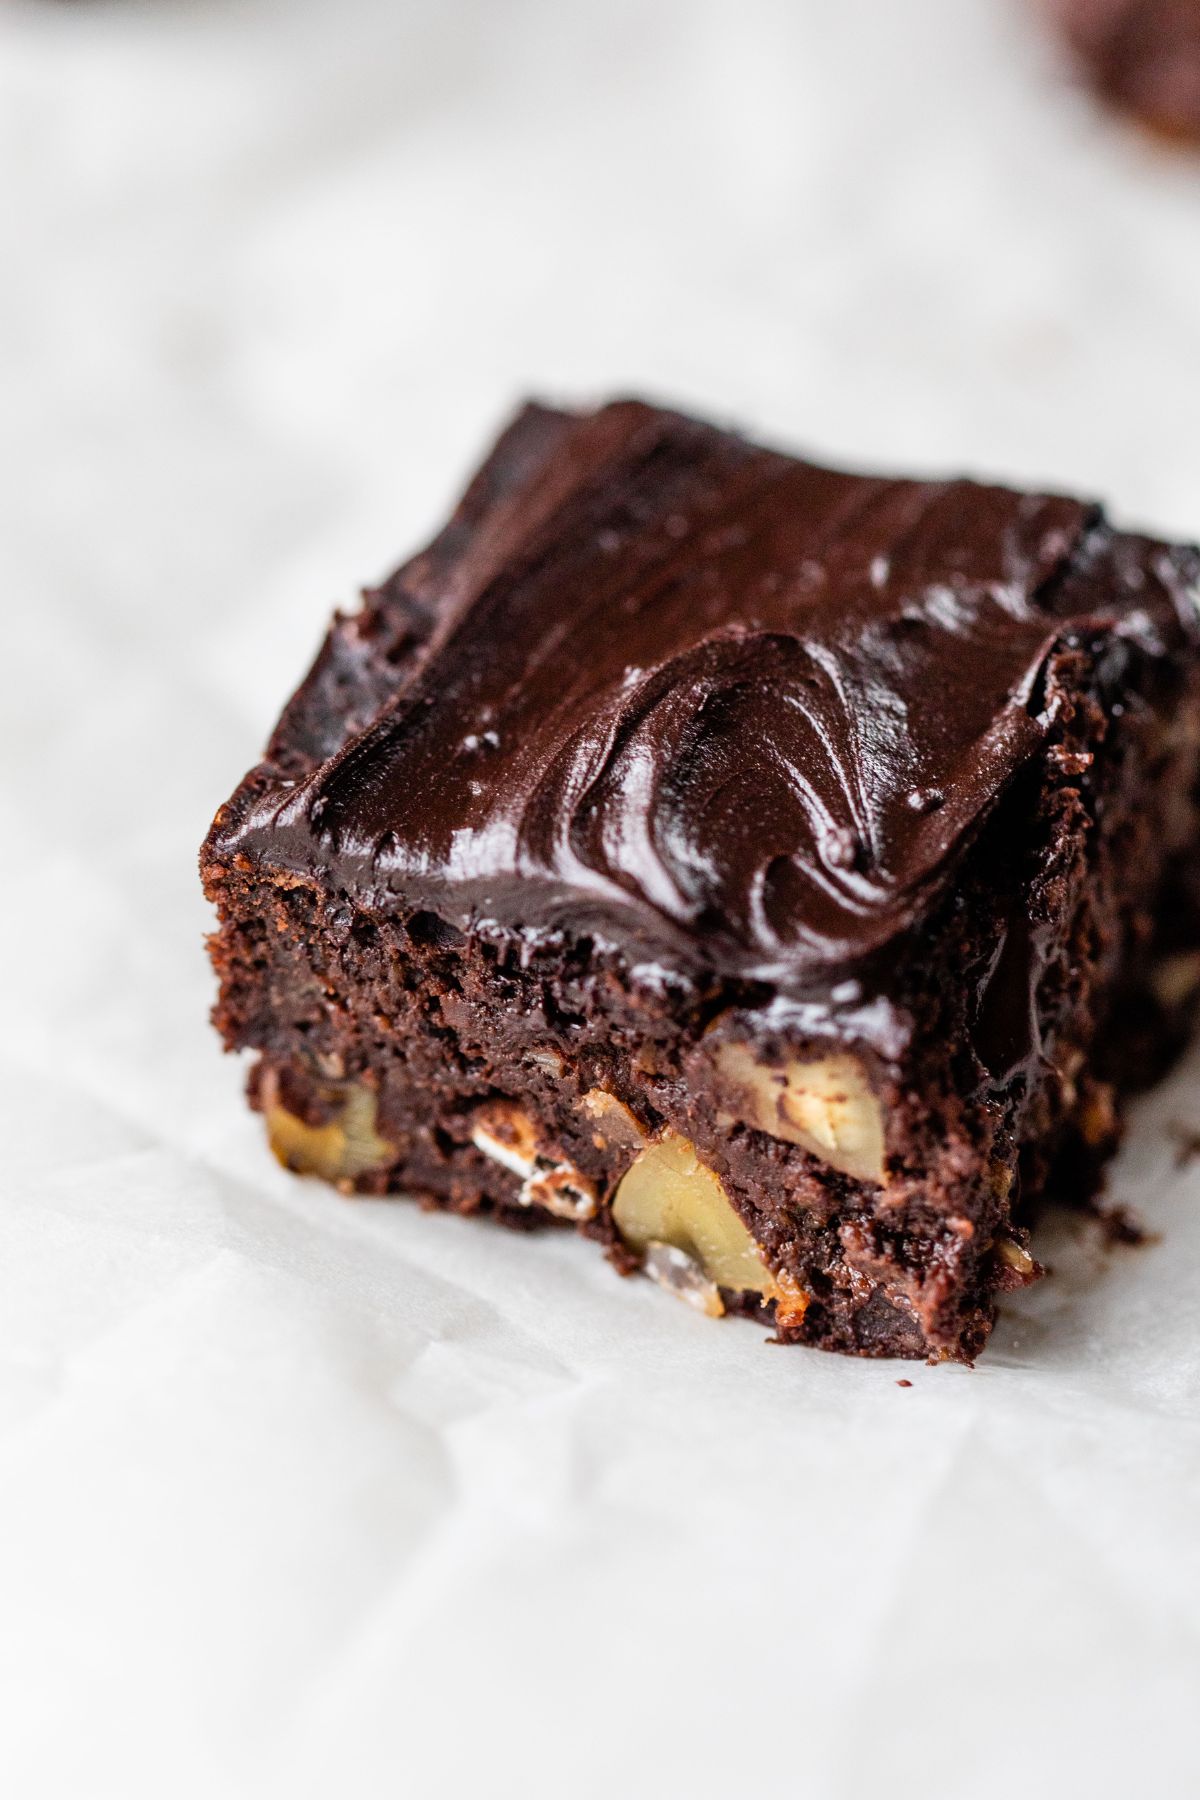 Black bean brownie with icing and nuts.